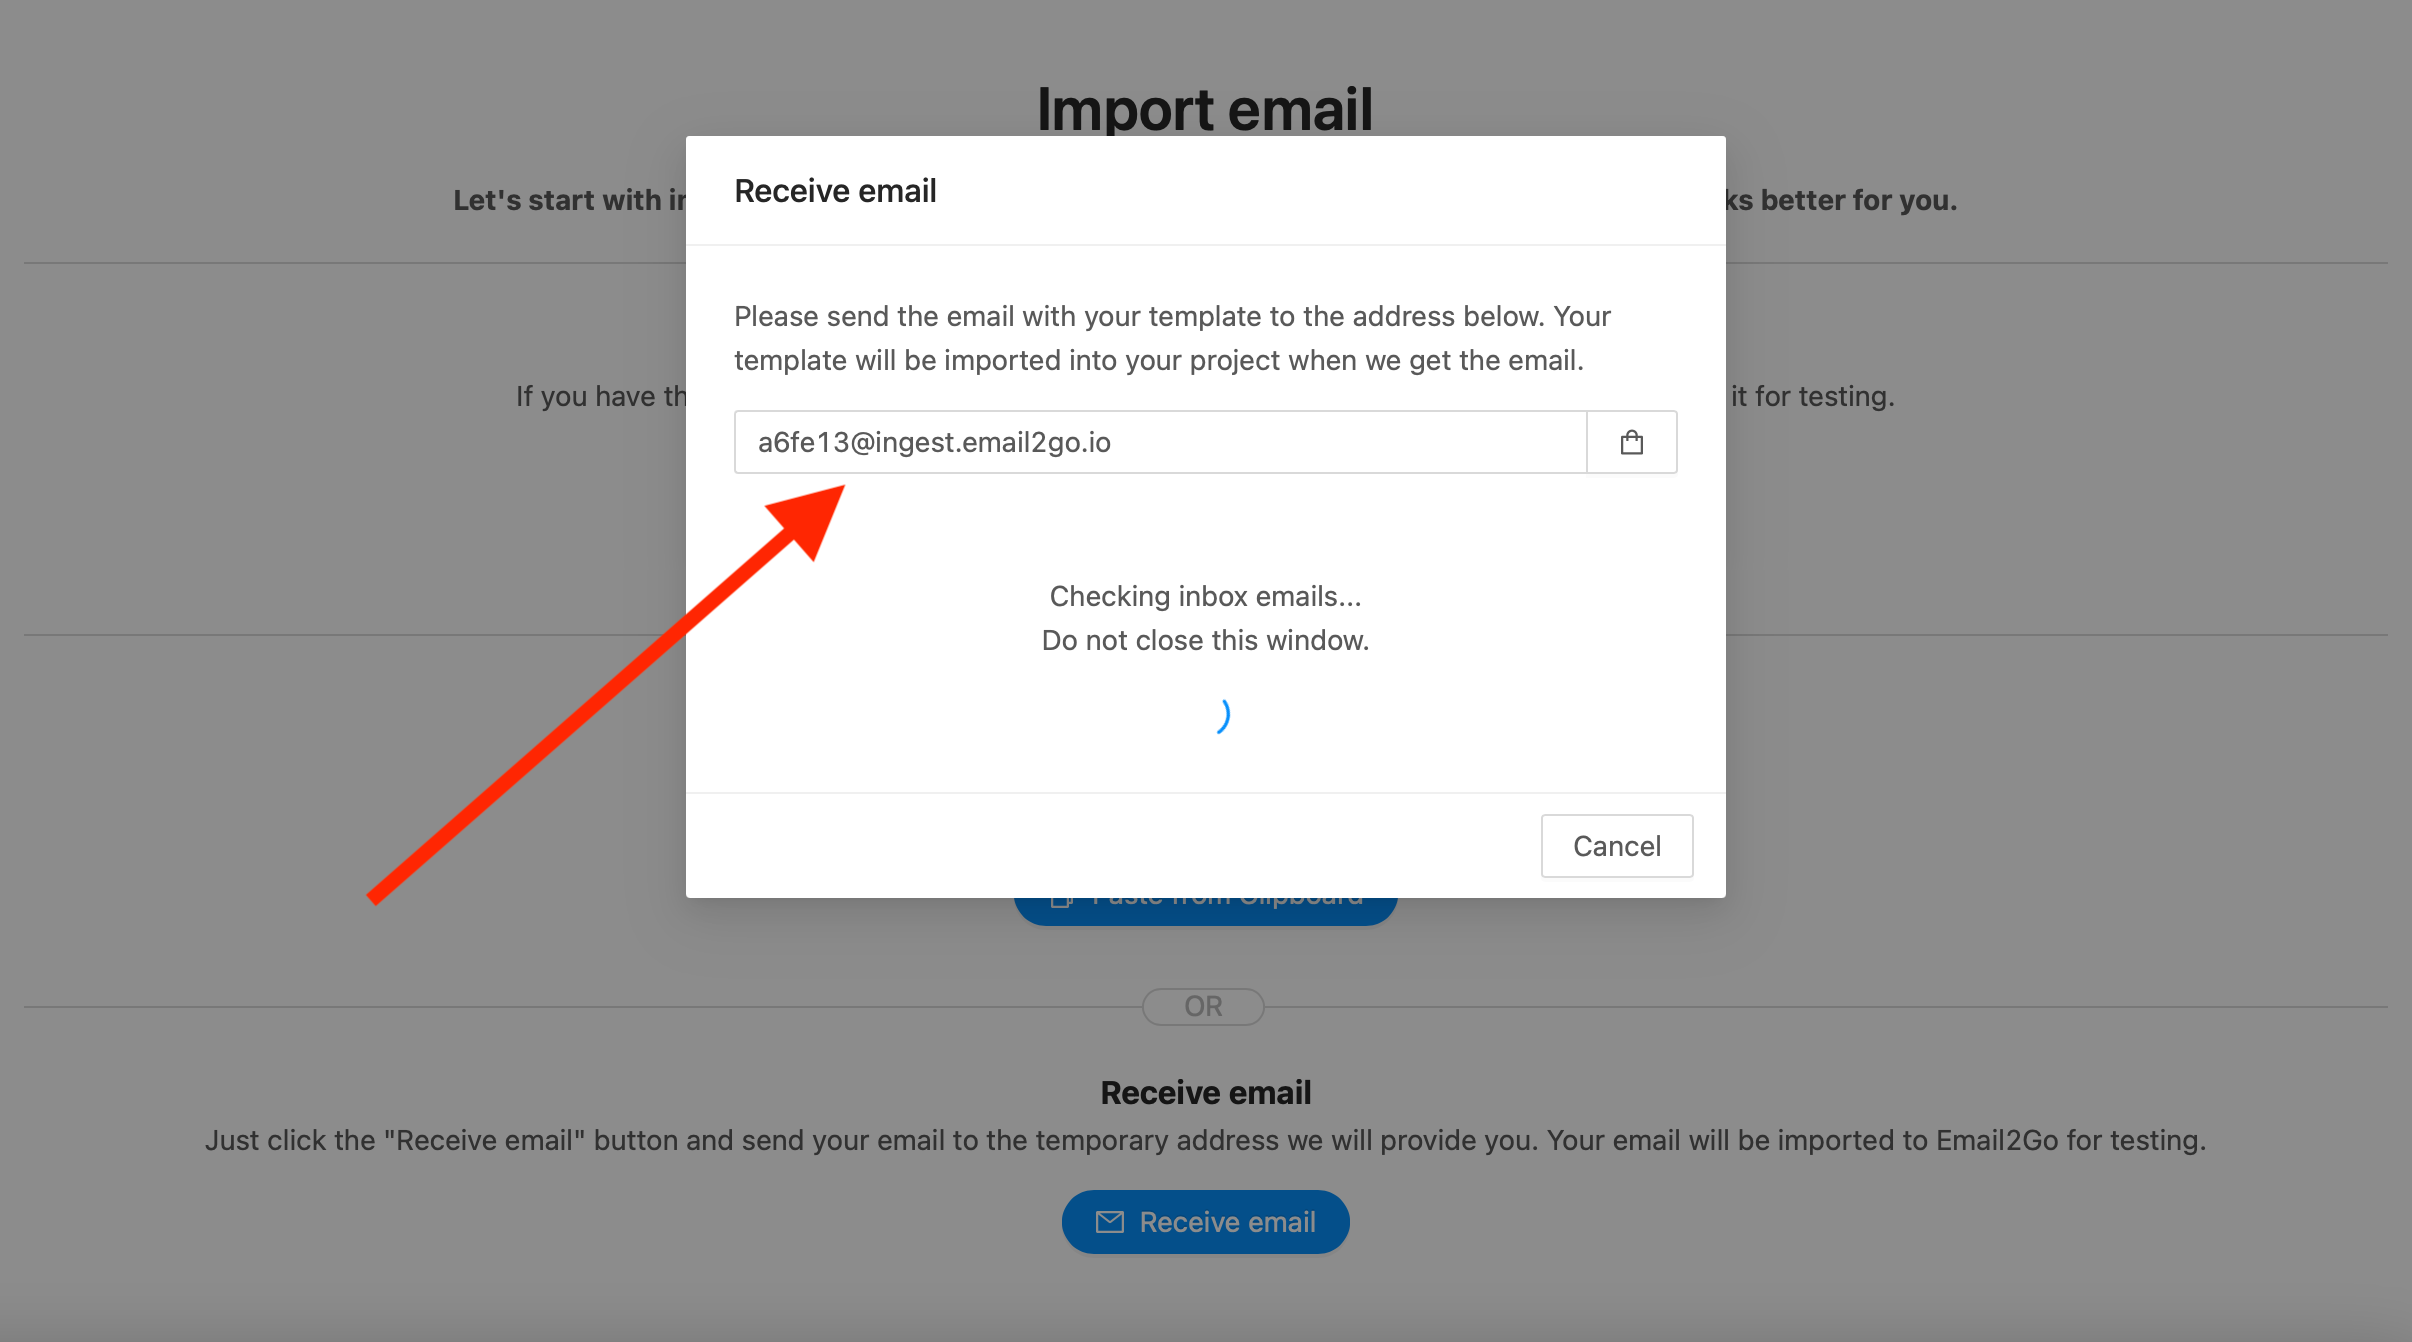 Email testing through receiving email